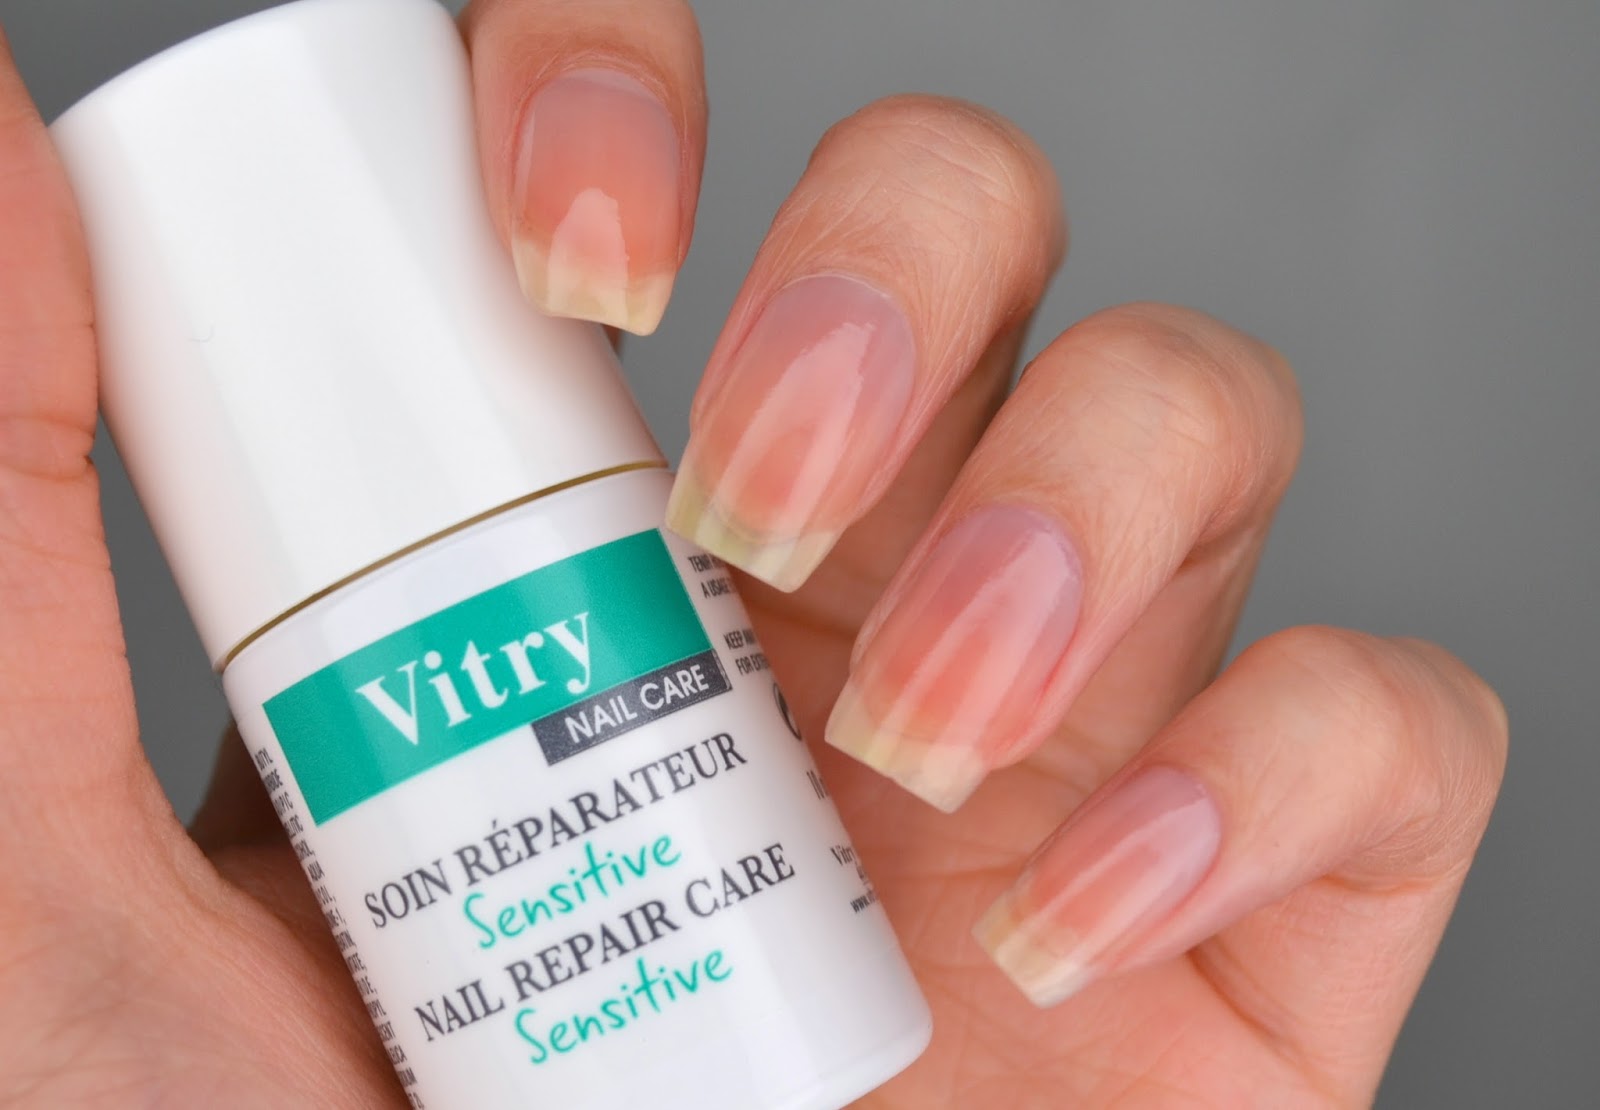 1. Vitry Nail Care Color - wide 4